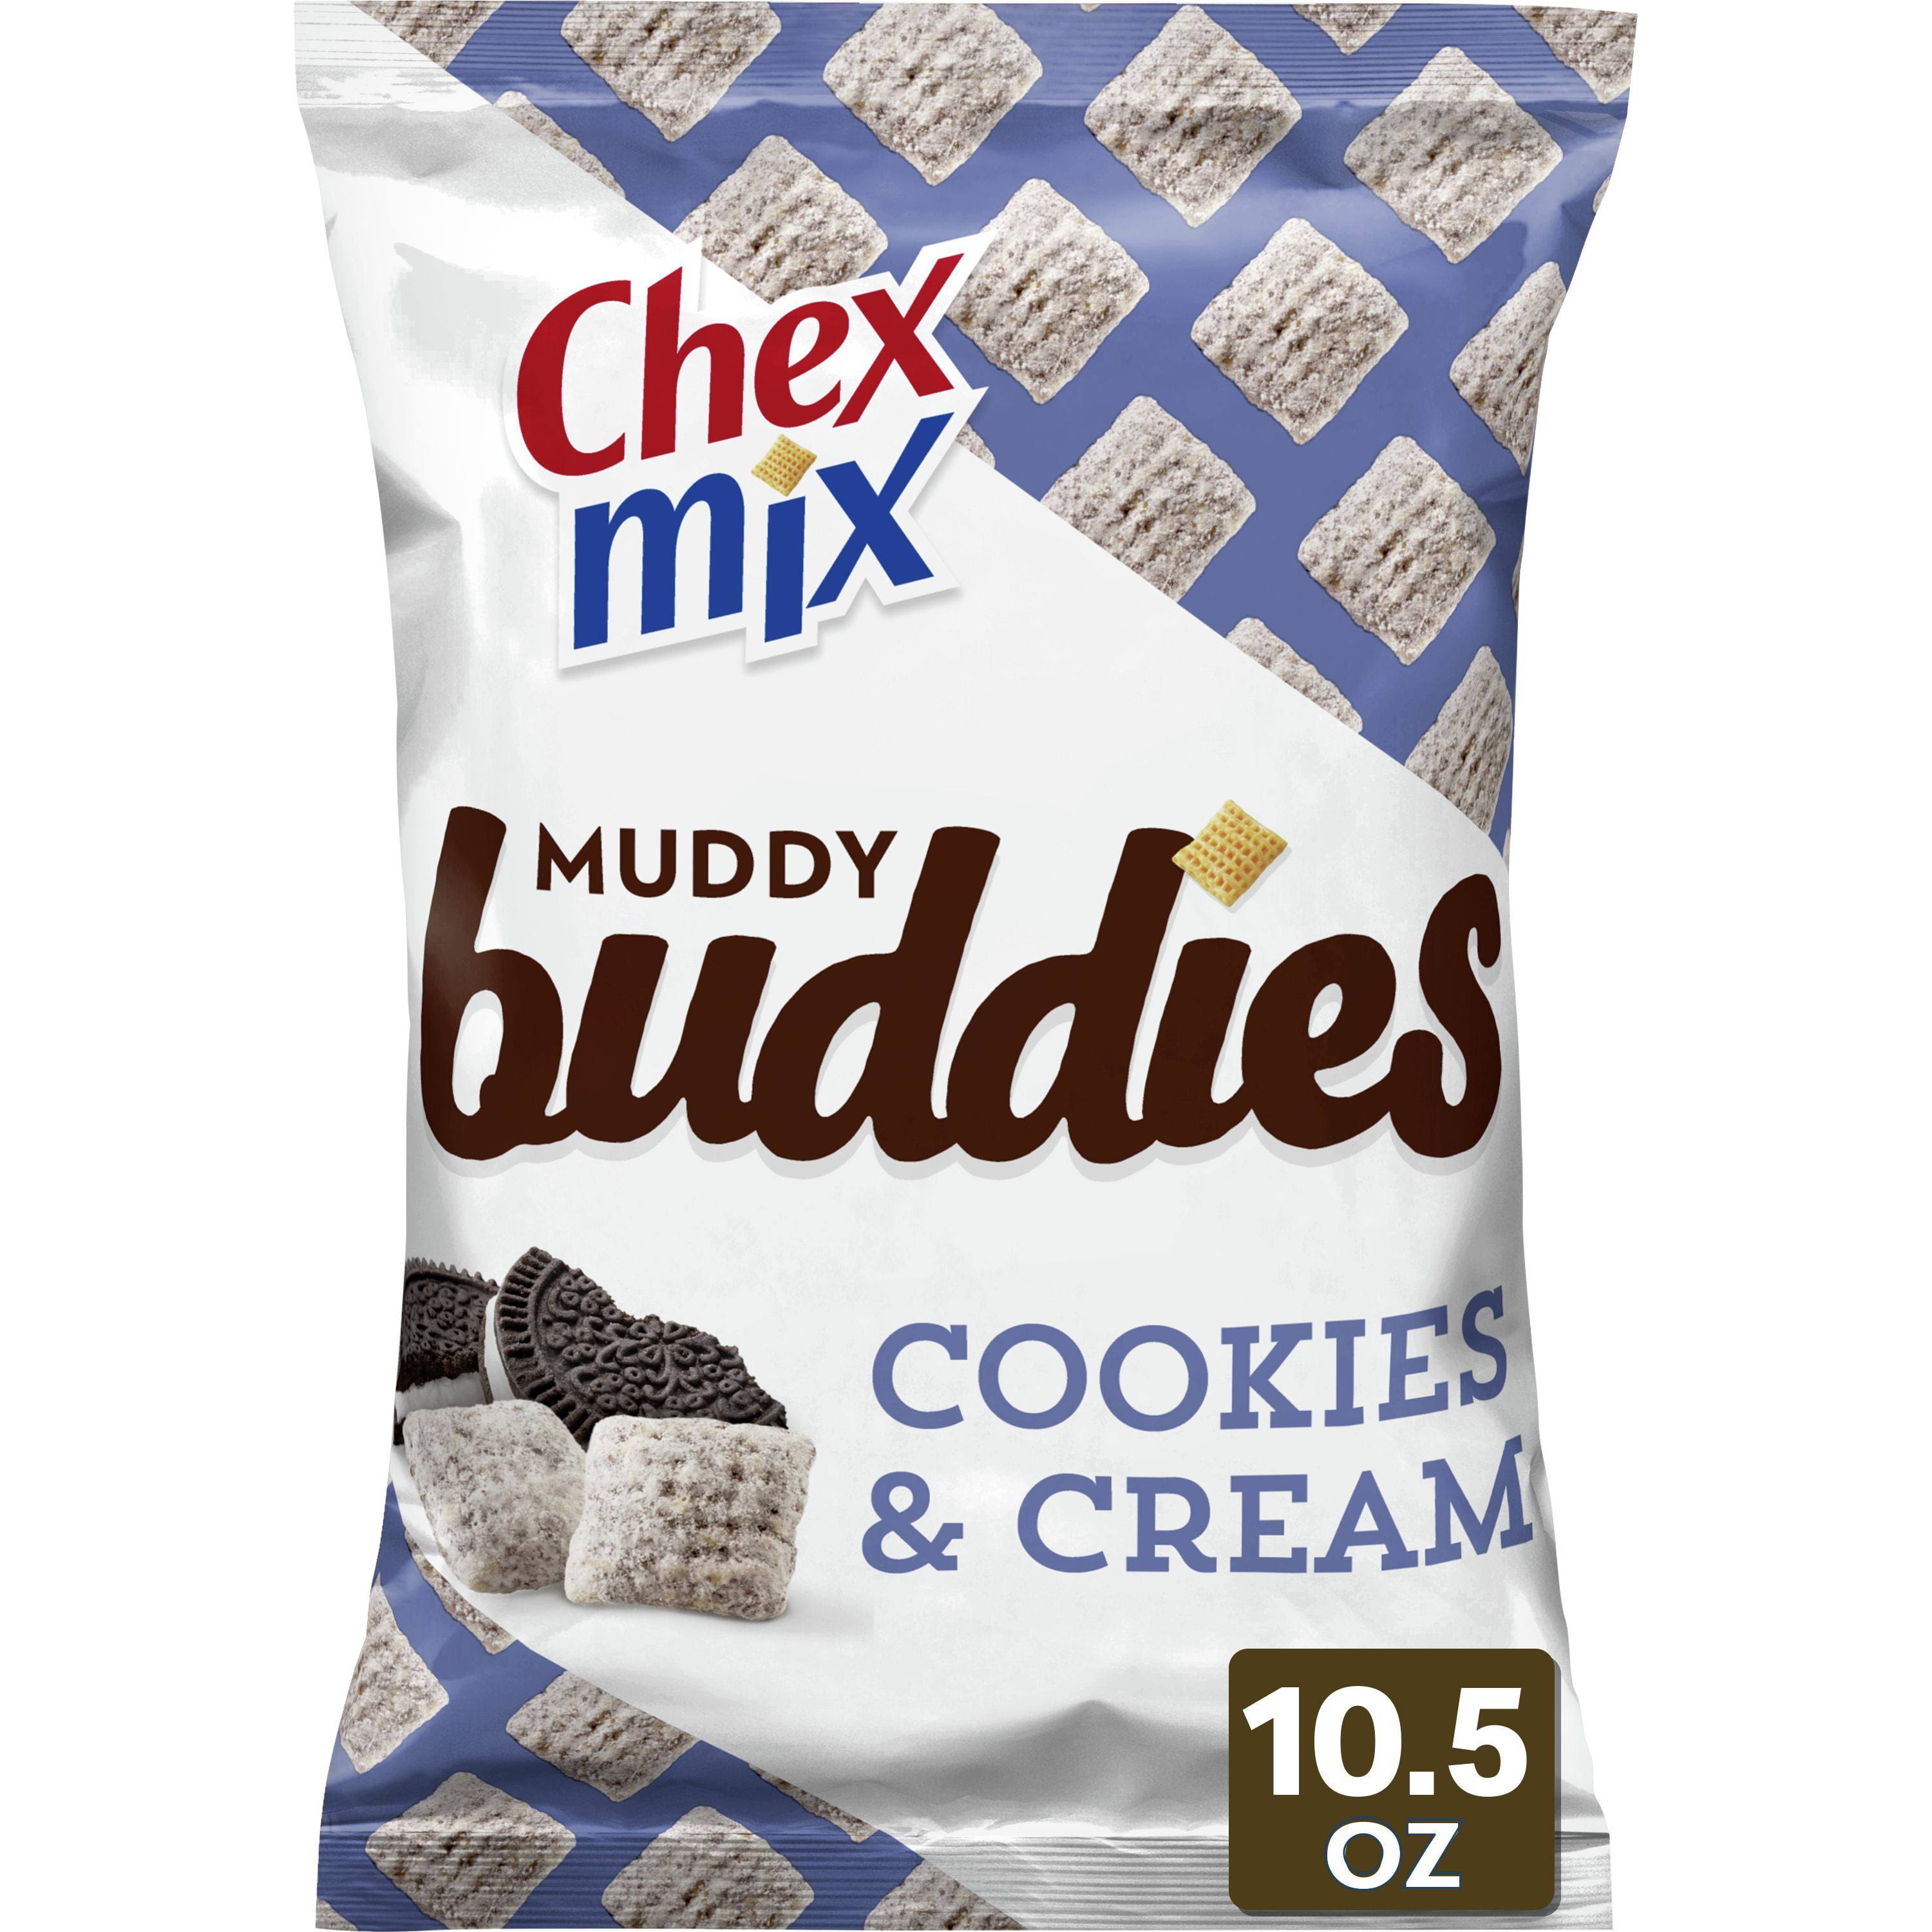 Chex Mix Muddy Buddies, Cookies And Cream, Snack Bag, 10.5 Oz